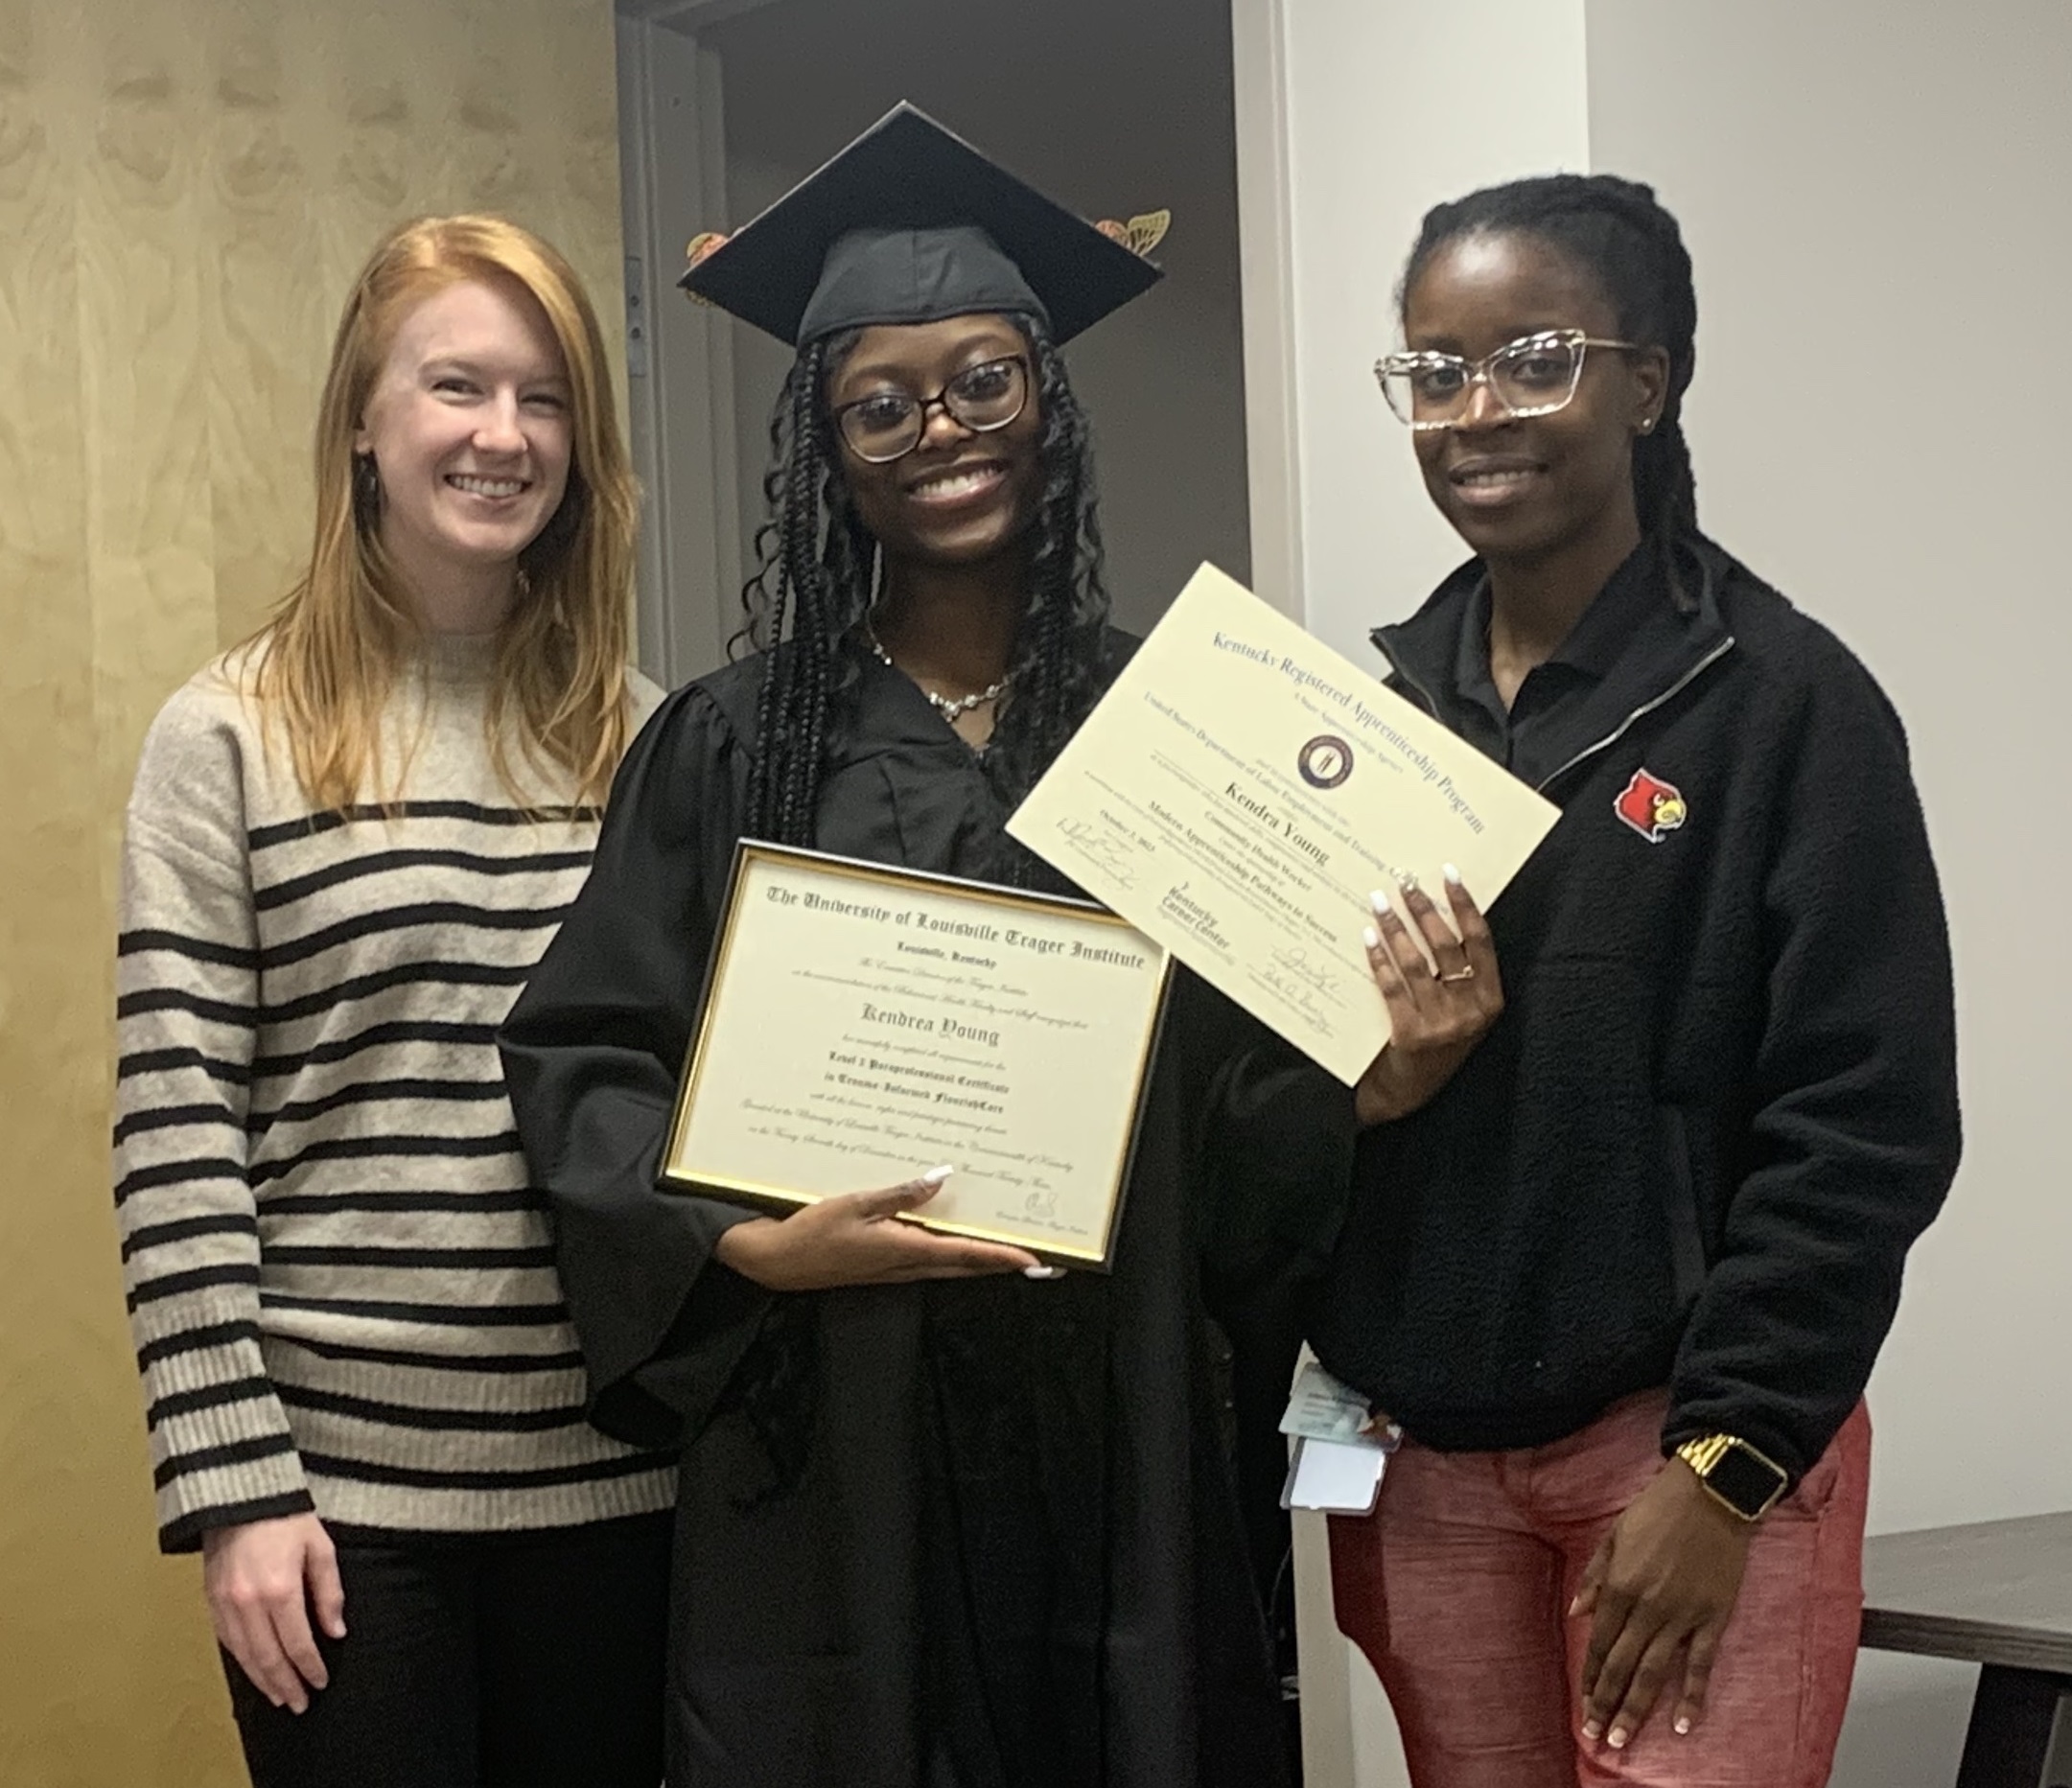 Kendrea Young, left, with Alexa Finnell and Tameka Lester, part of the inaugural cohort of apprentices from the Trauma-Informed FlourishCare™ Paraprofessional Program, an innovative 18-month program designed to equip participants for careers in behavioral health.